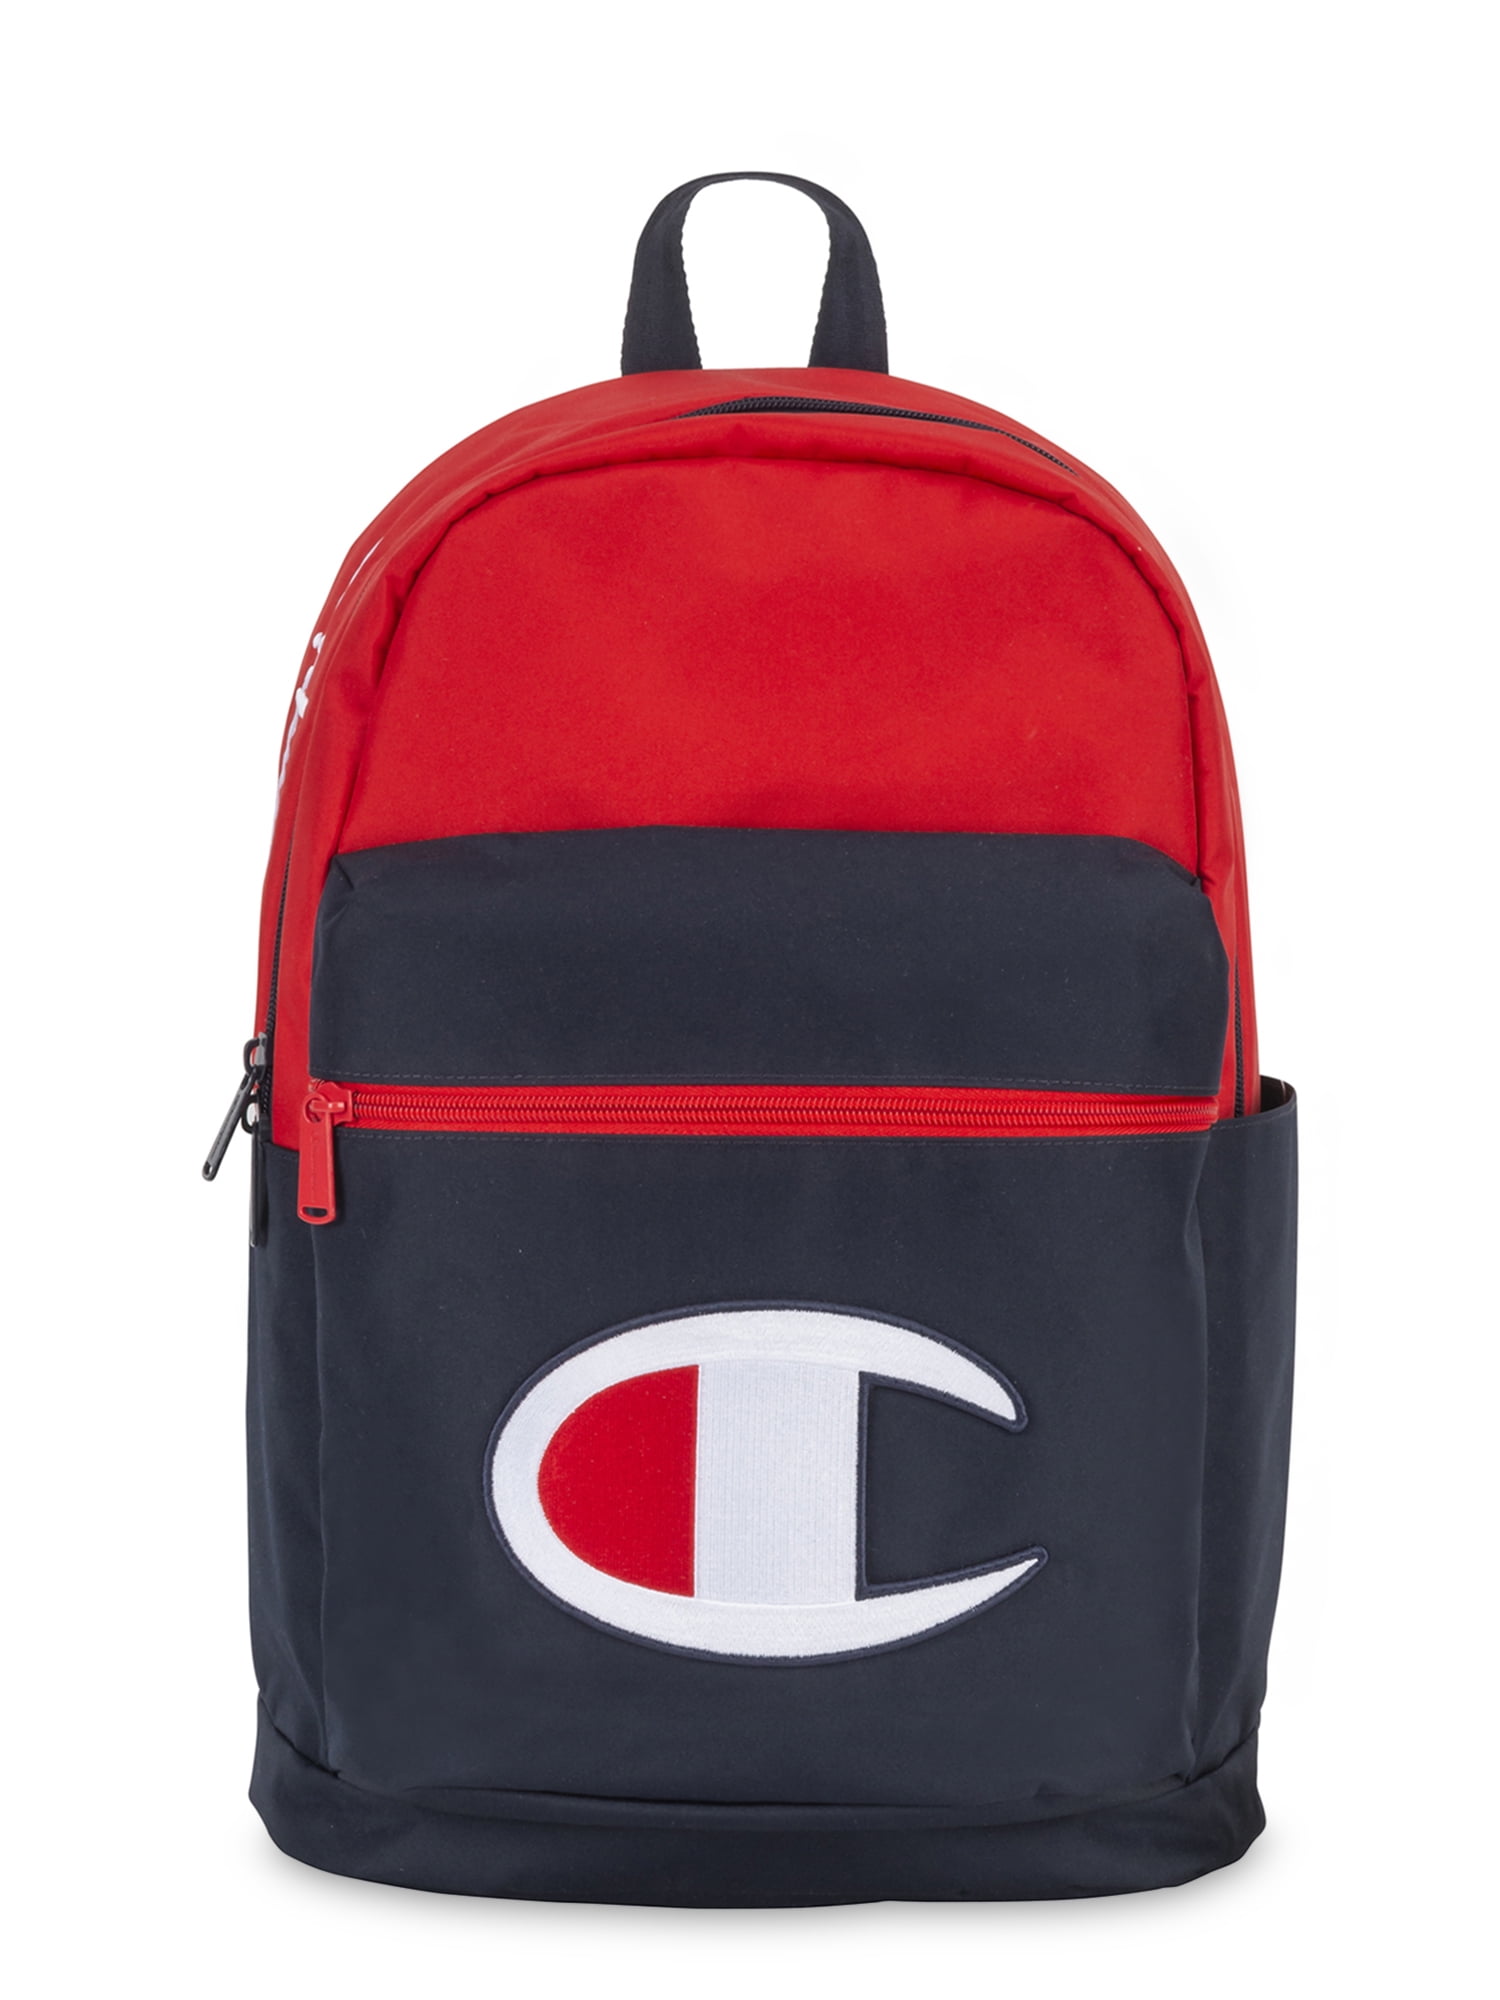 Champion Youth Supercize Backpack - Walmart.com